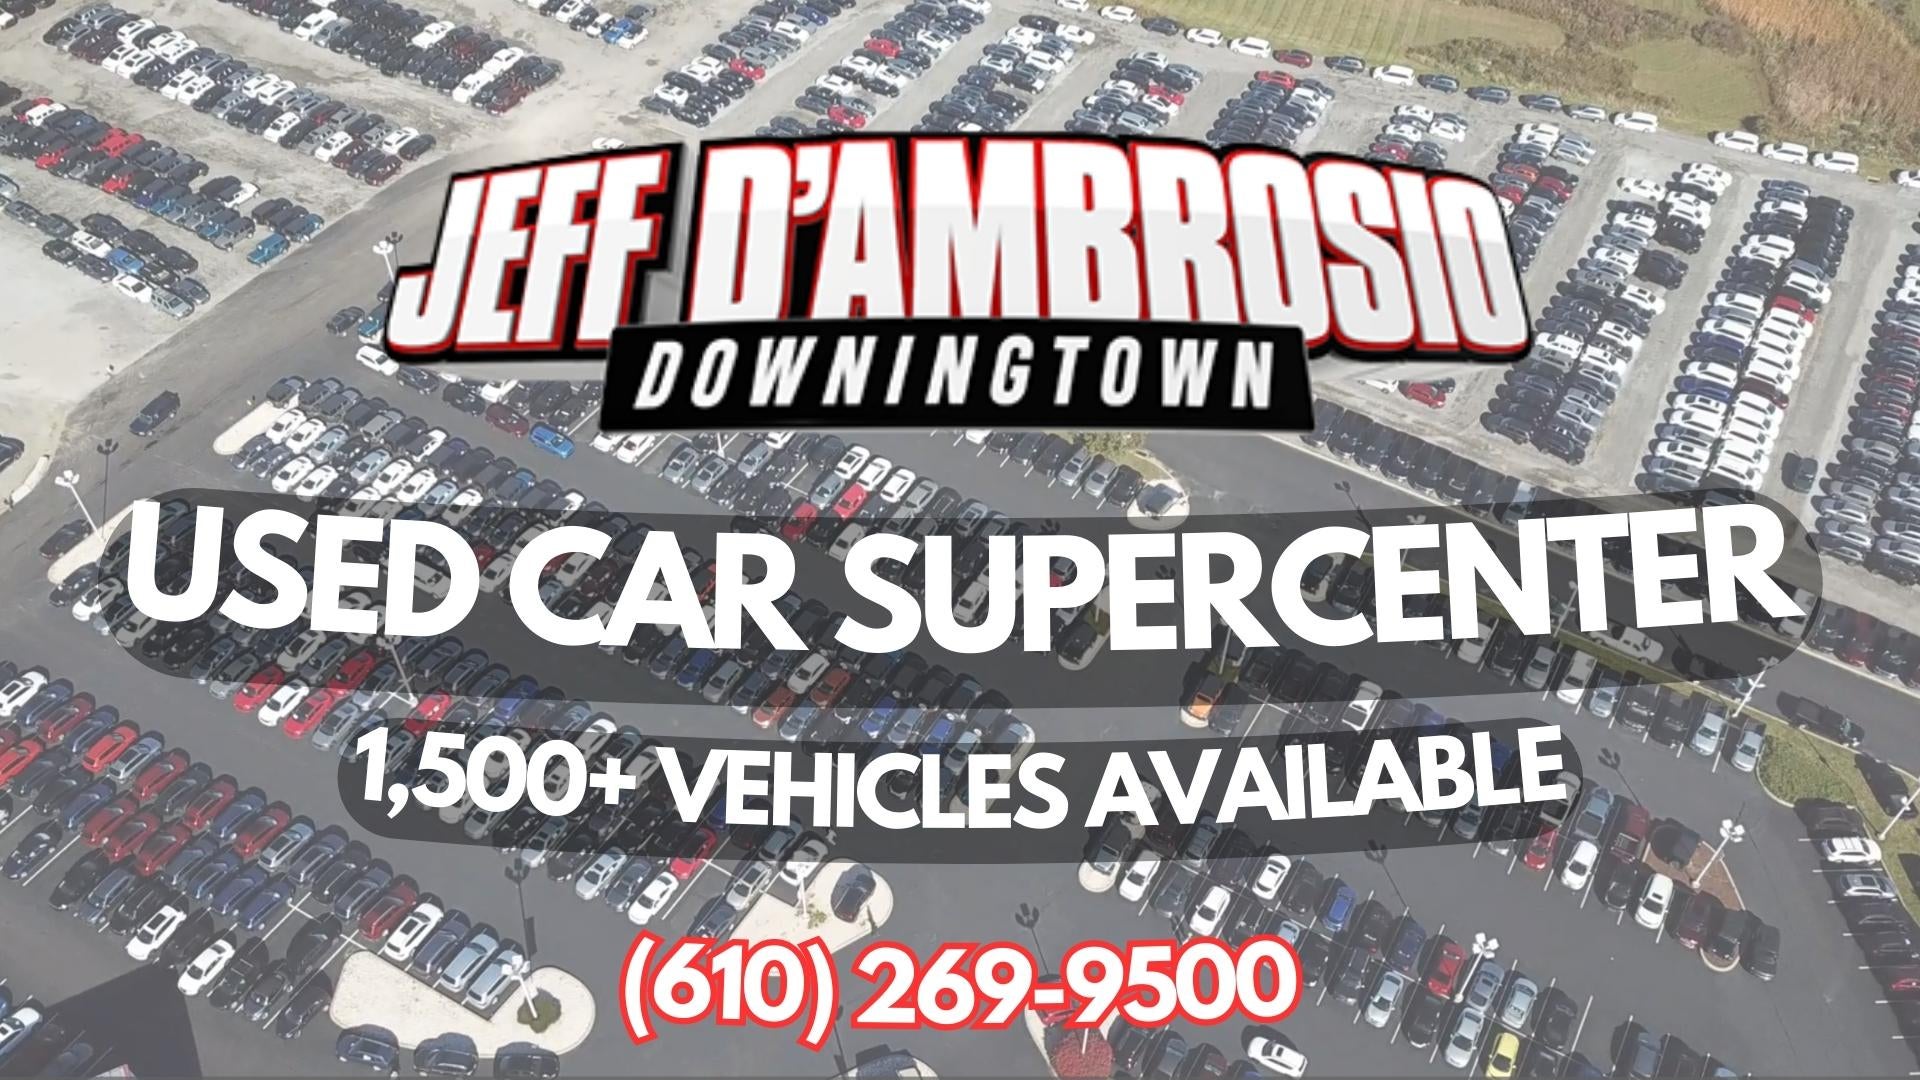 Cars available in Chester County, PA at 